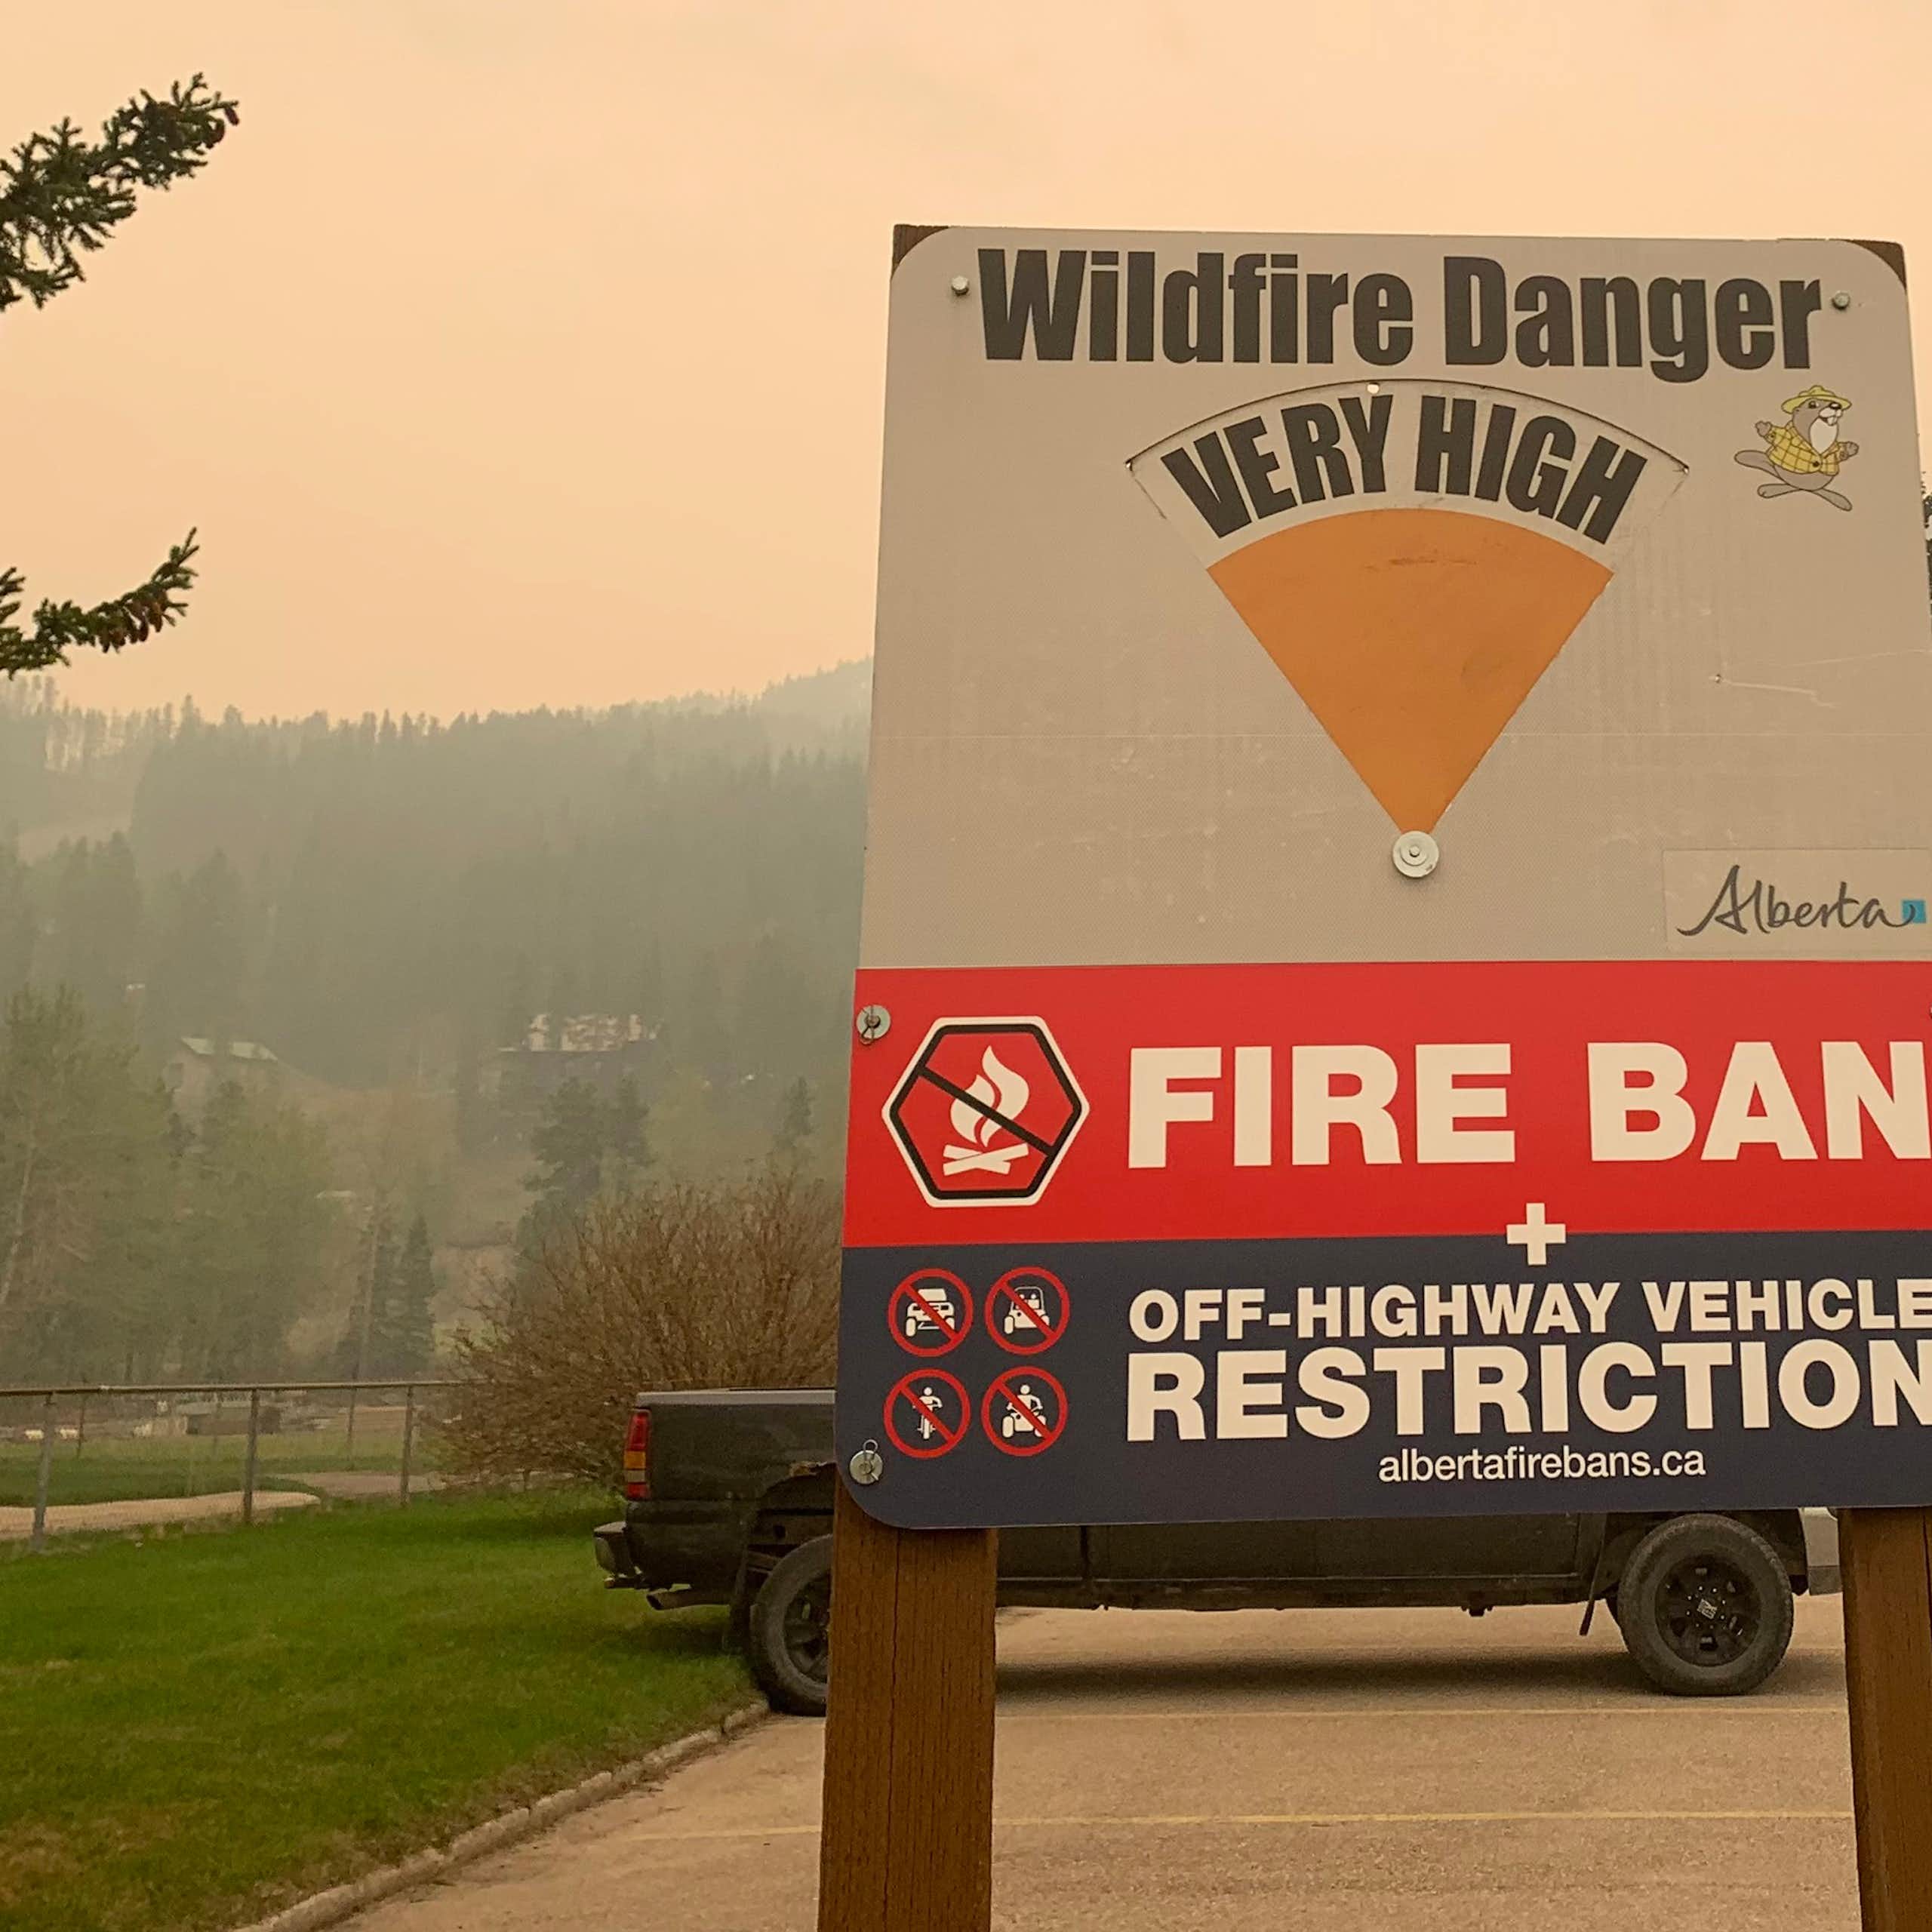 A wildfire danger sign seen with the words "fire ban" against a hazy sky.